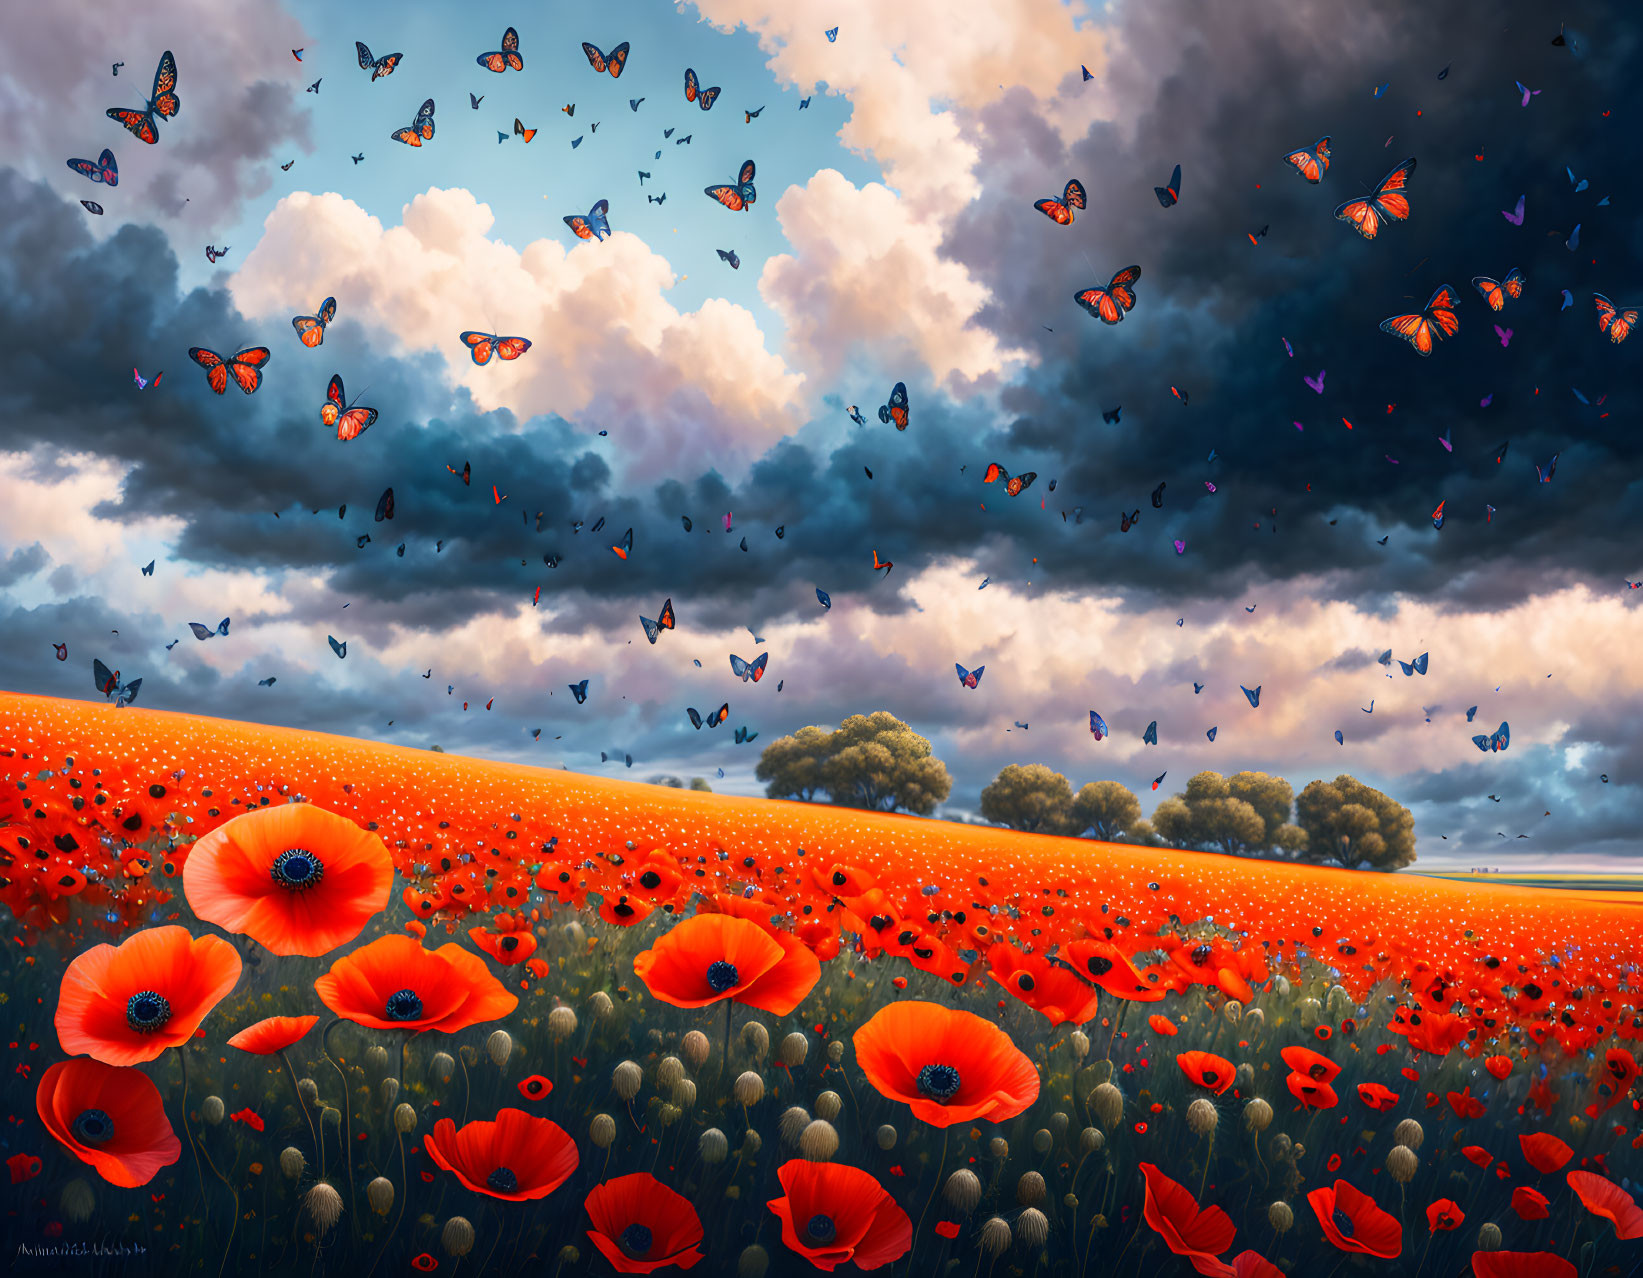  Poppies and Butterflies